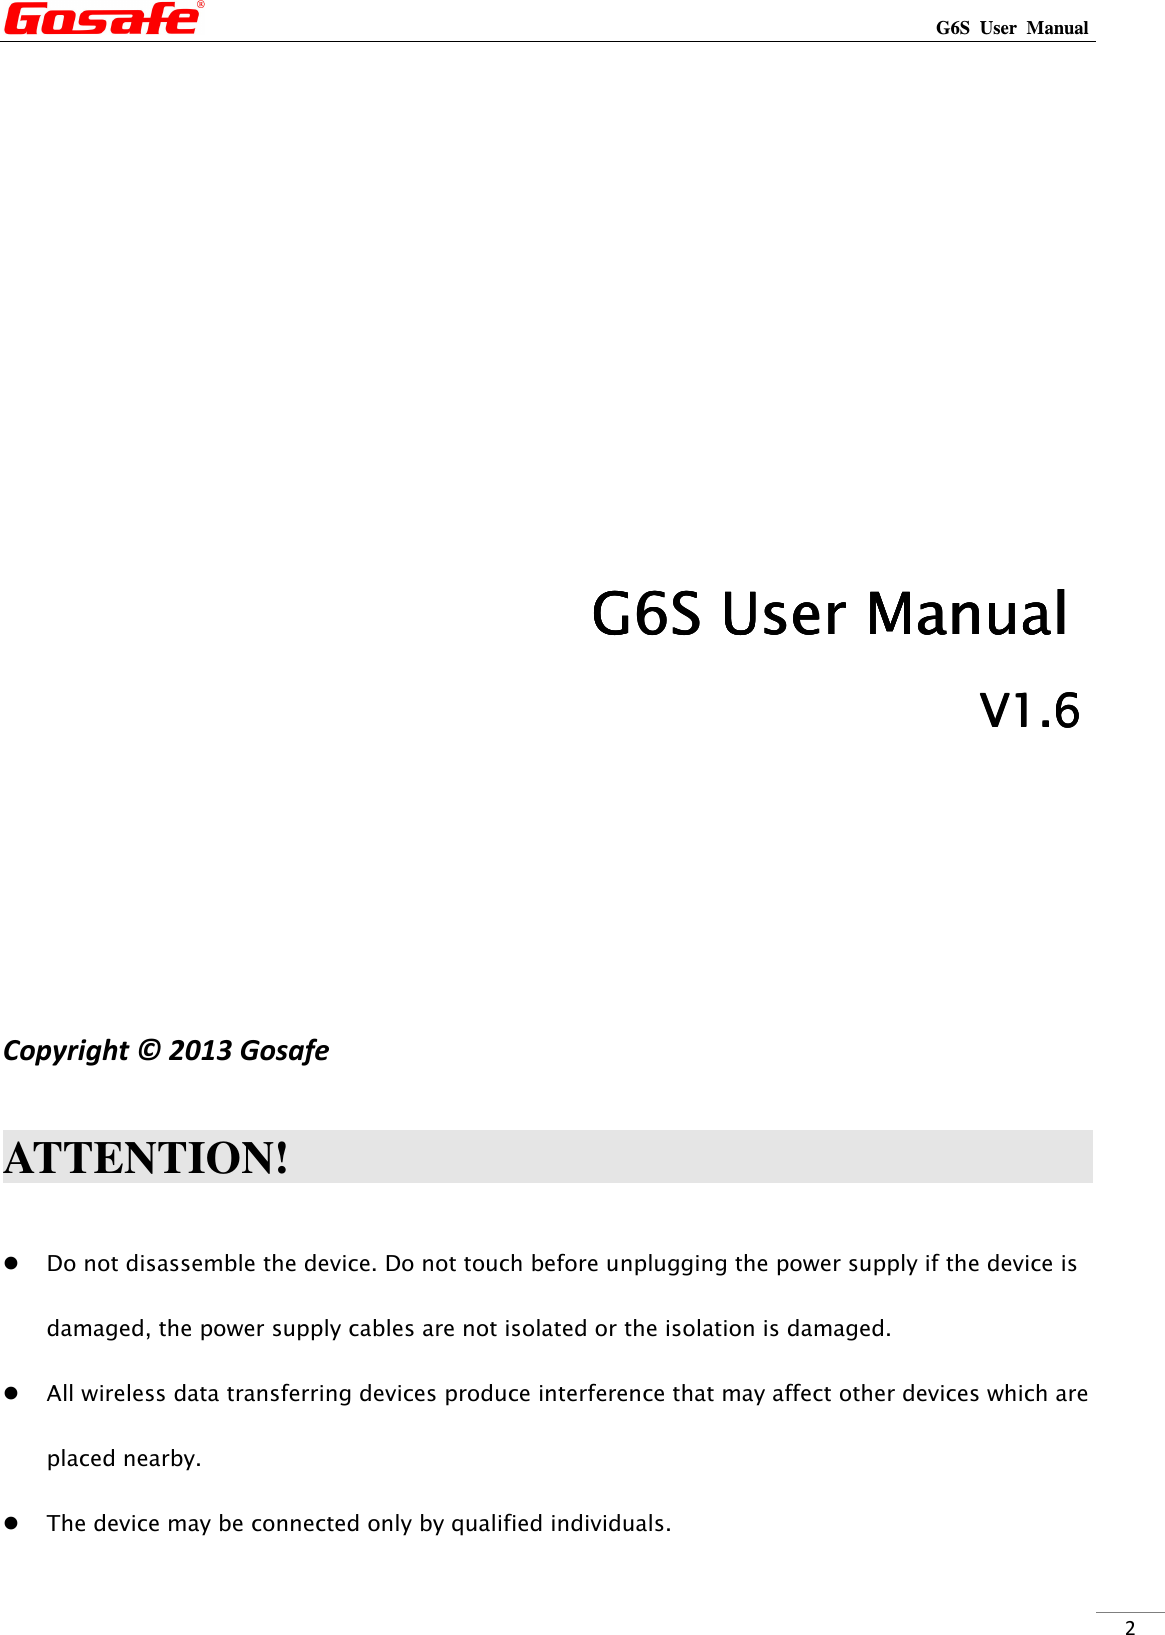                                                                                                                                                             G6S  User  Manual  2                                                                                                                             G6SG6SG6SG6S    User ManualUser ManualUser ManualUser Manual                                                                                                                V1.V1.V1.V1.6666                    Copyright © 2013 Gosafe    ATTENTION!                                                                                        Do not disassemble the device. Do not touch before unplugging the power supply if the device is damaged, the power supply cables are not isolated or the isolation is damaged.  All wireless data transferring devices produce interference that may affect other devices which are placed nearby.  The device may be connected only by qualified individuals. 